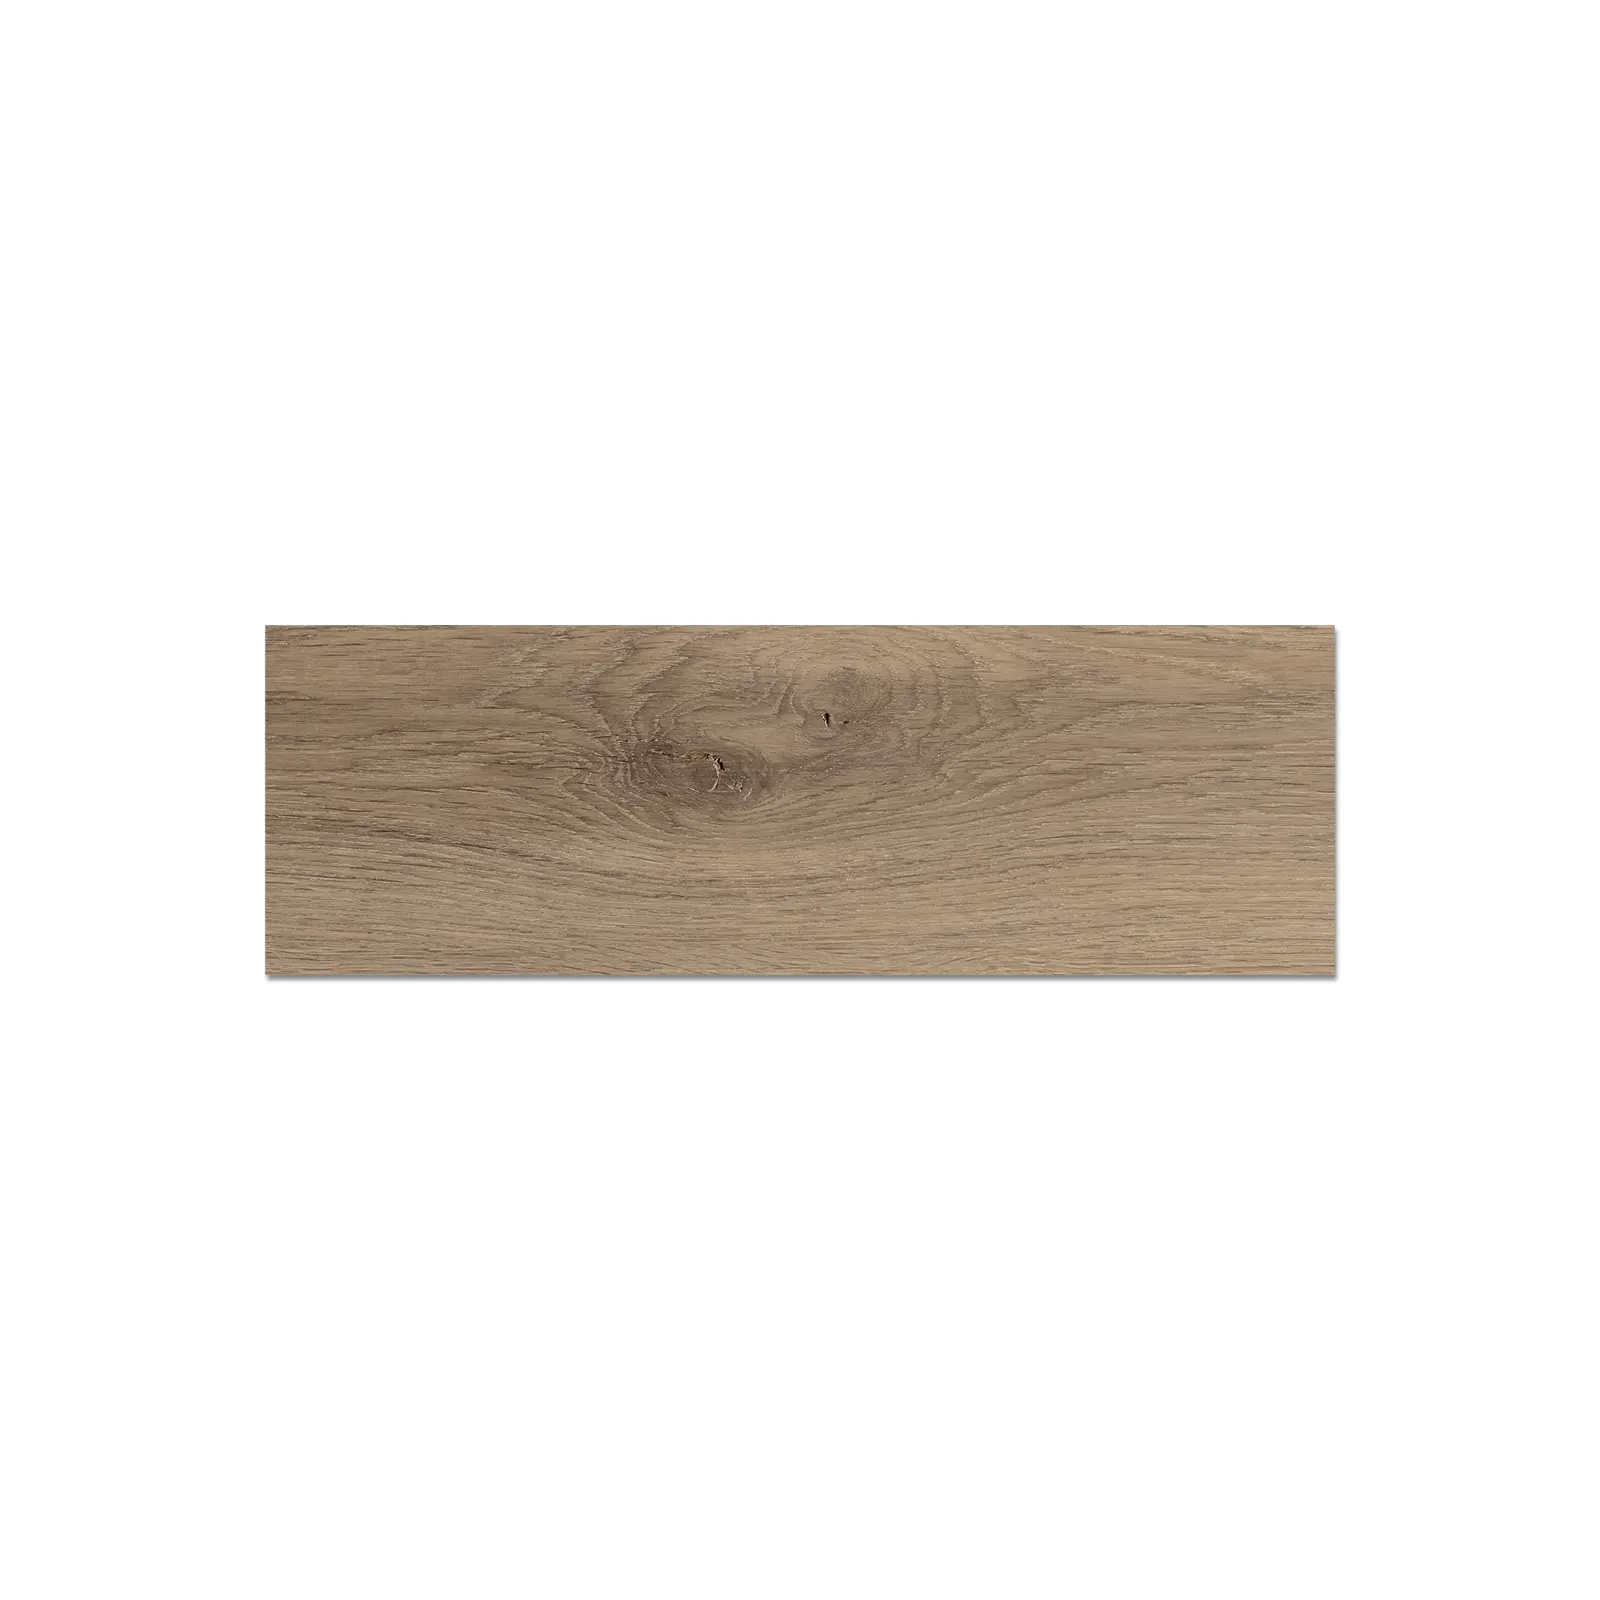 NATURAWOOD CAOBA N FD MATE SIN RECT 18 X 55